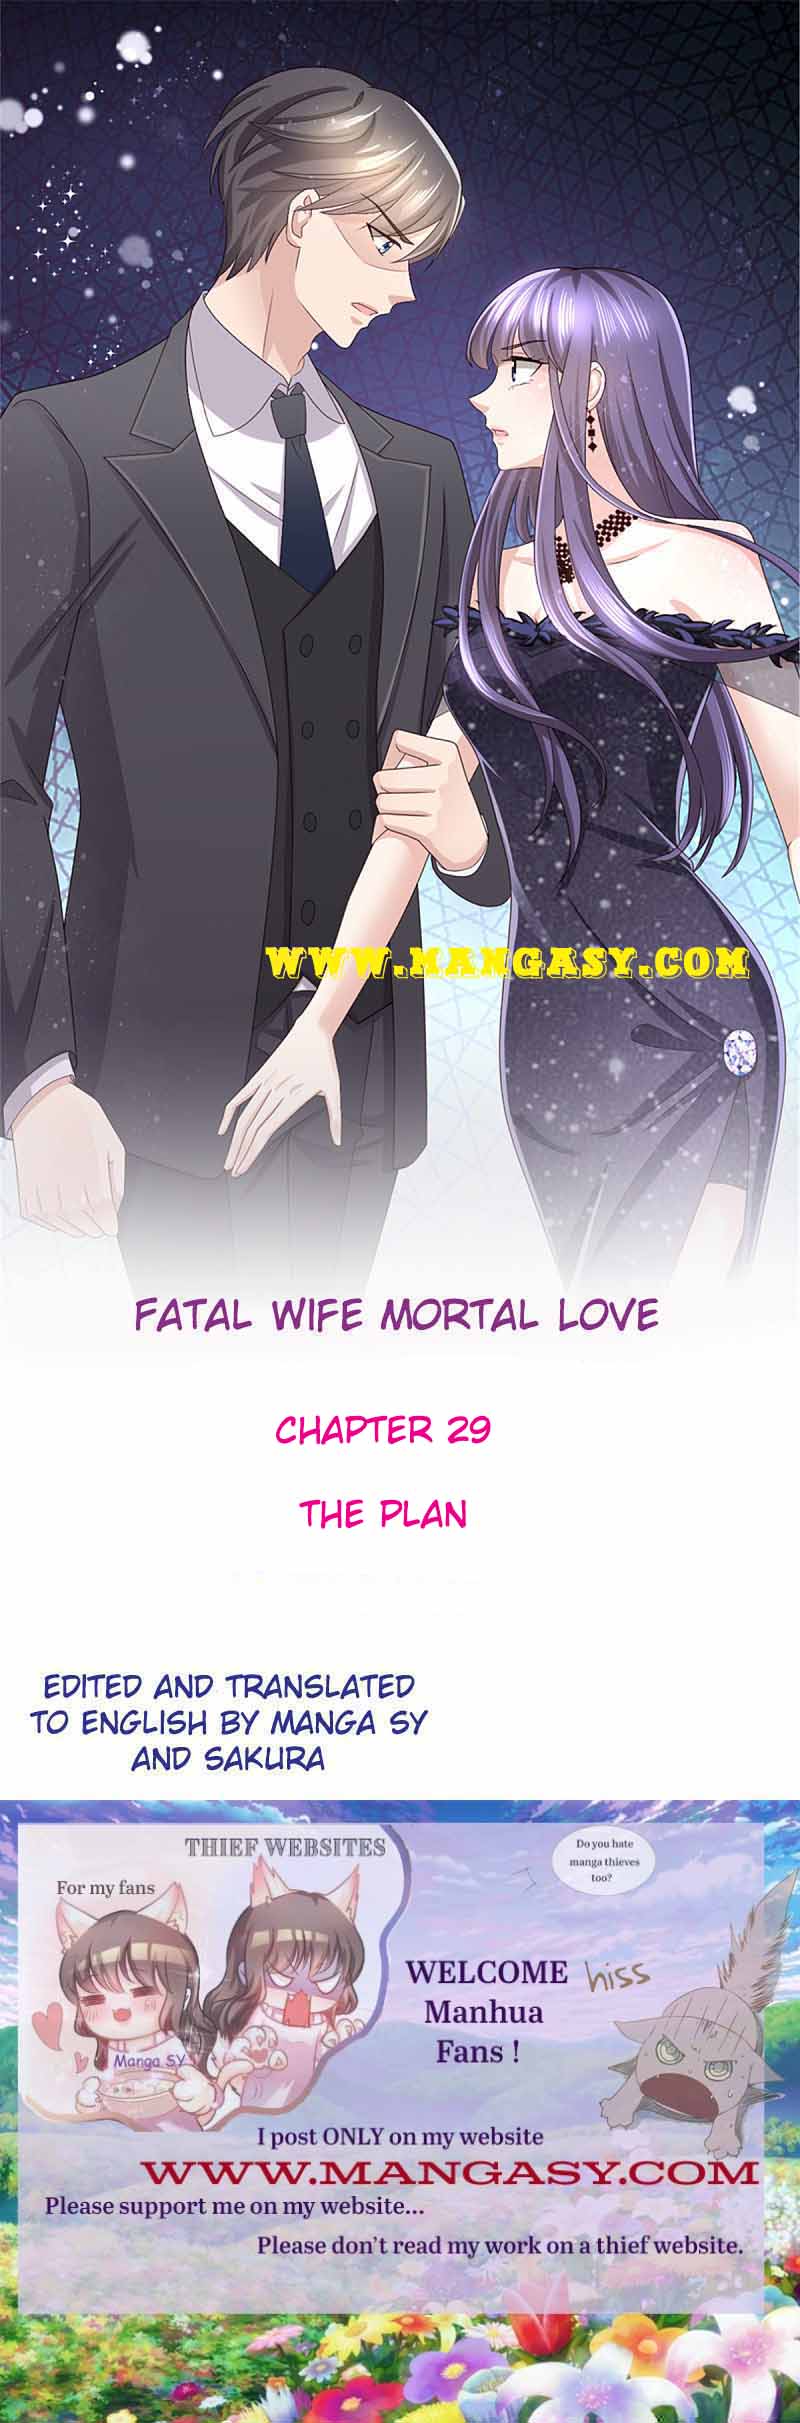 A Deadly Sexy Wife: The Ceo Wants To Remarry - 29 page 1-74c13de0